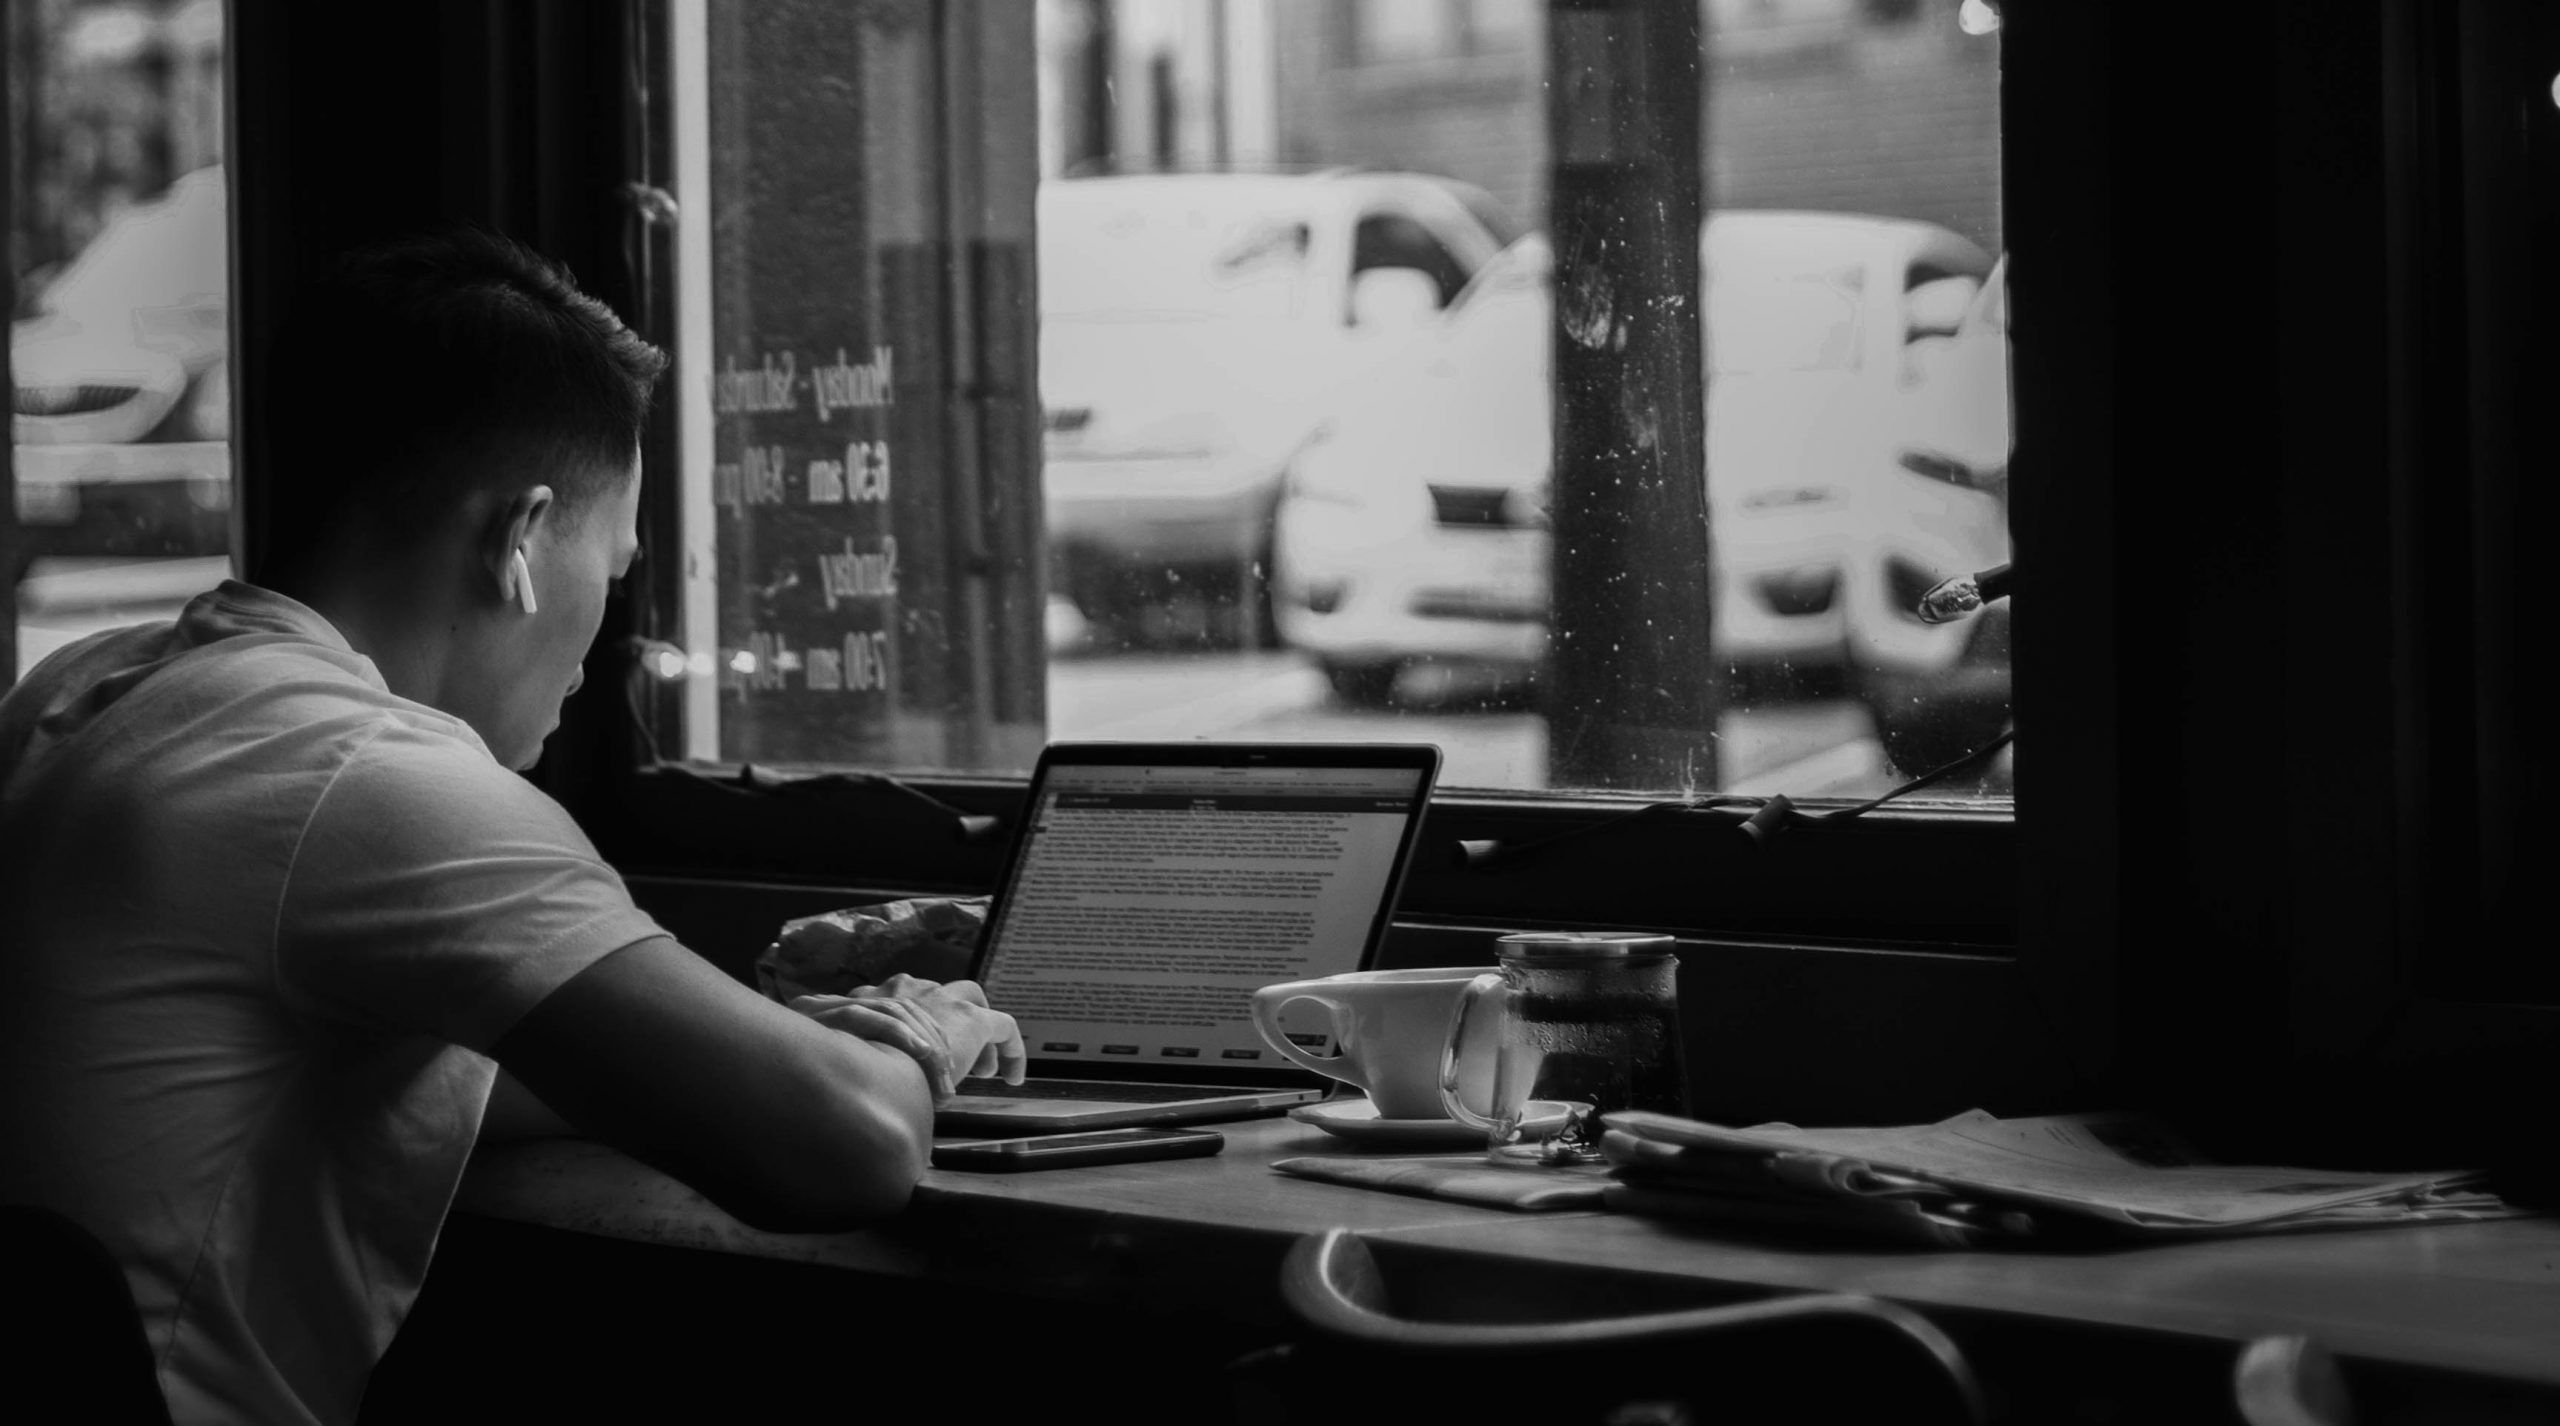 black and white image of person using laptop